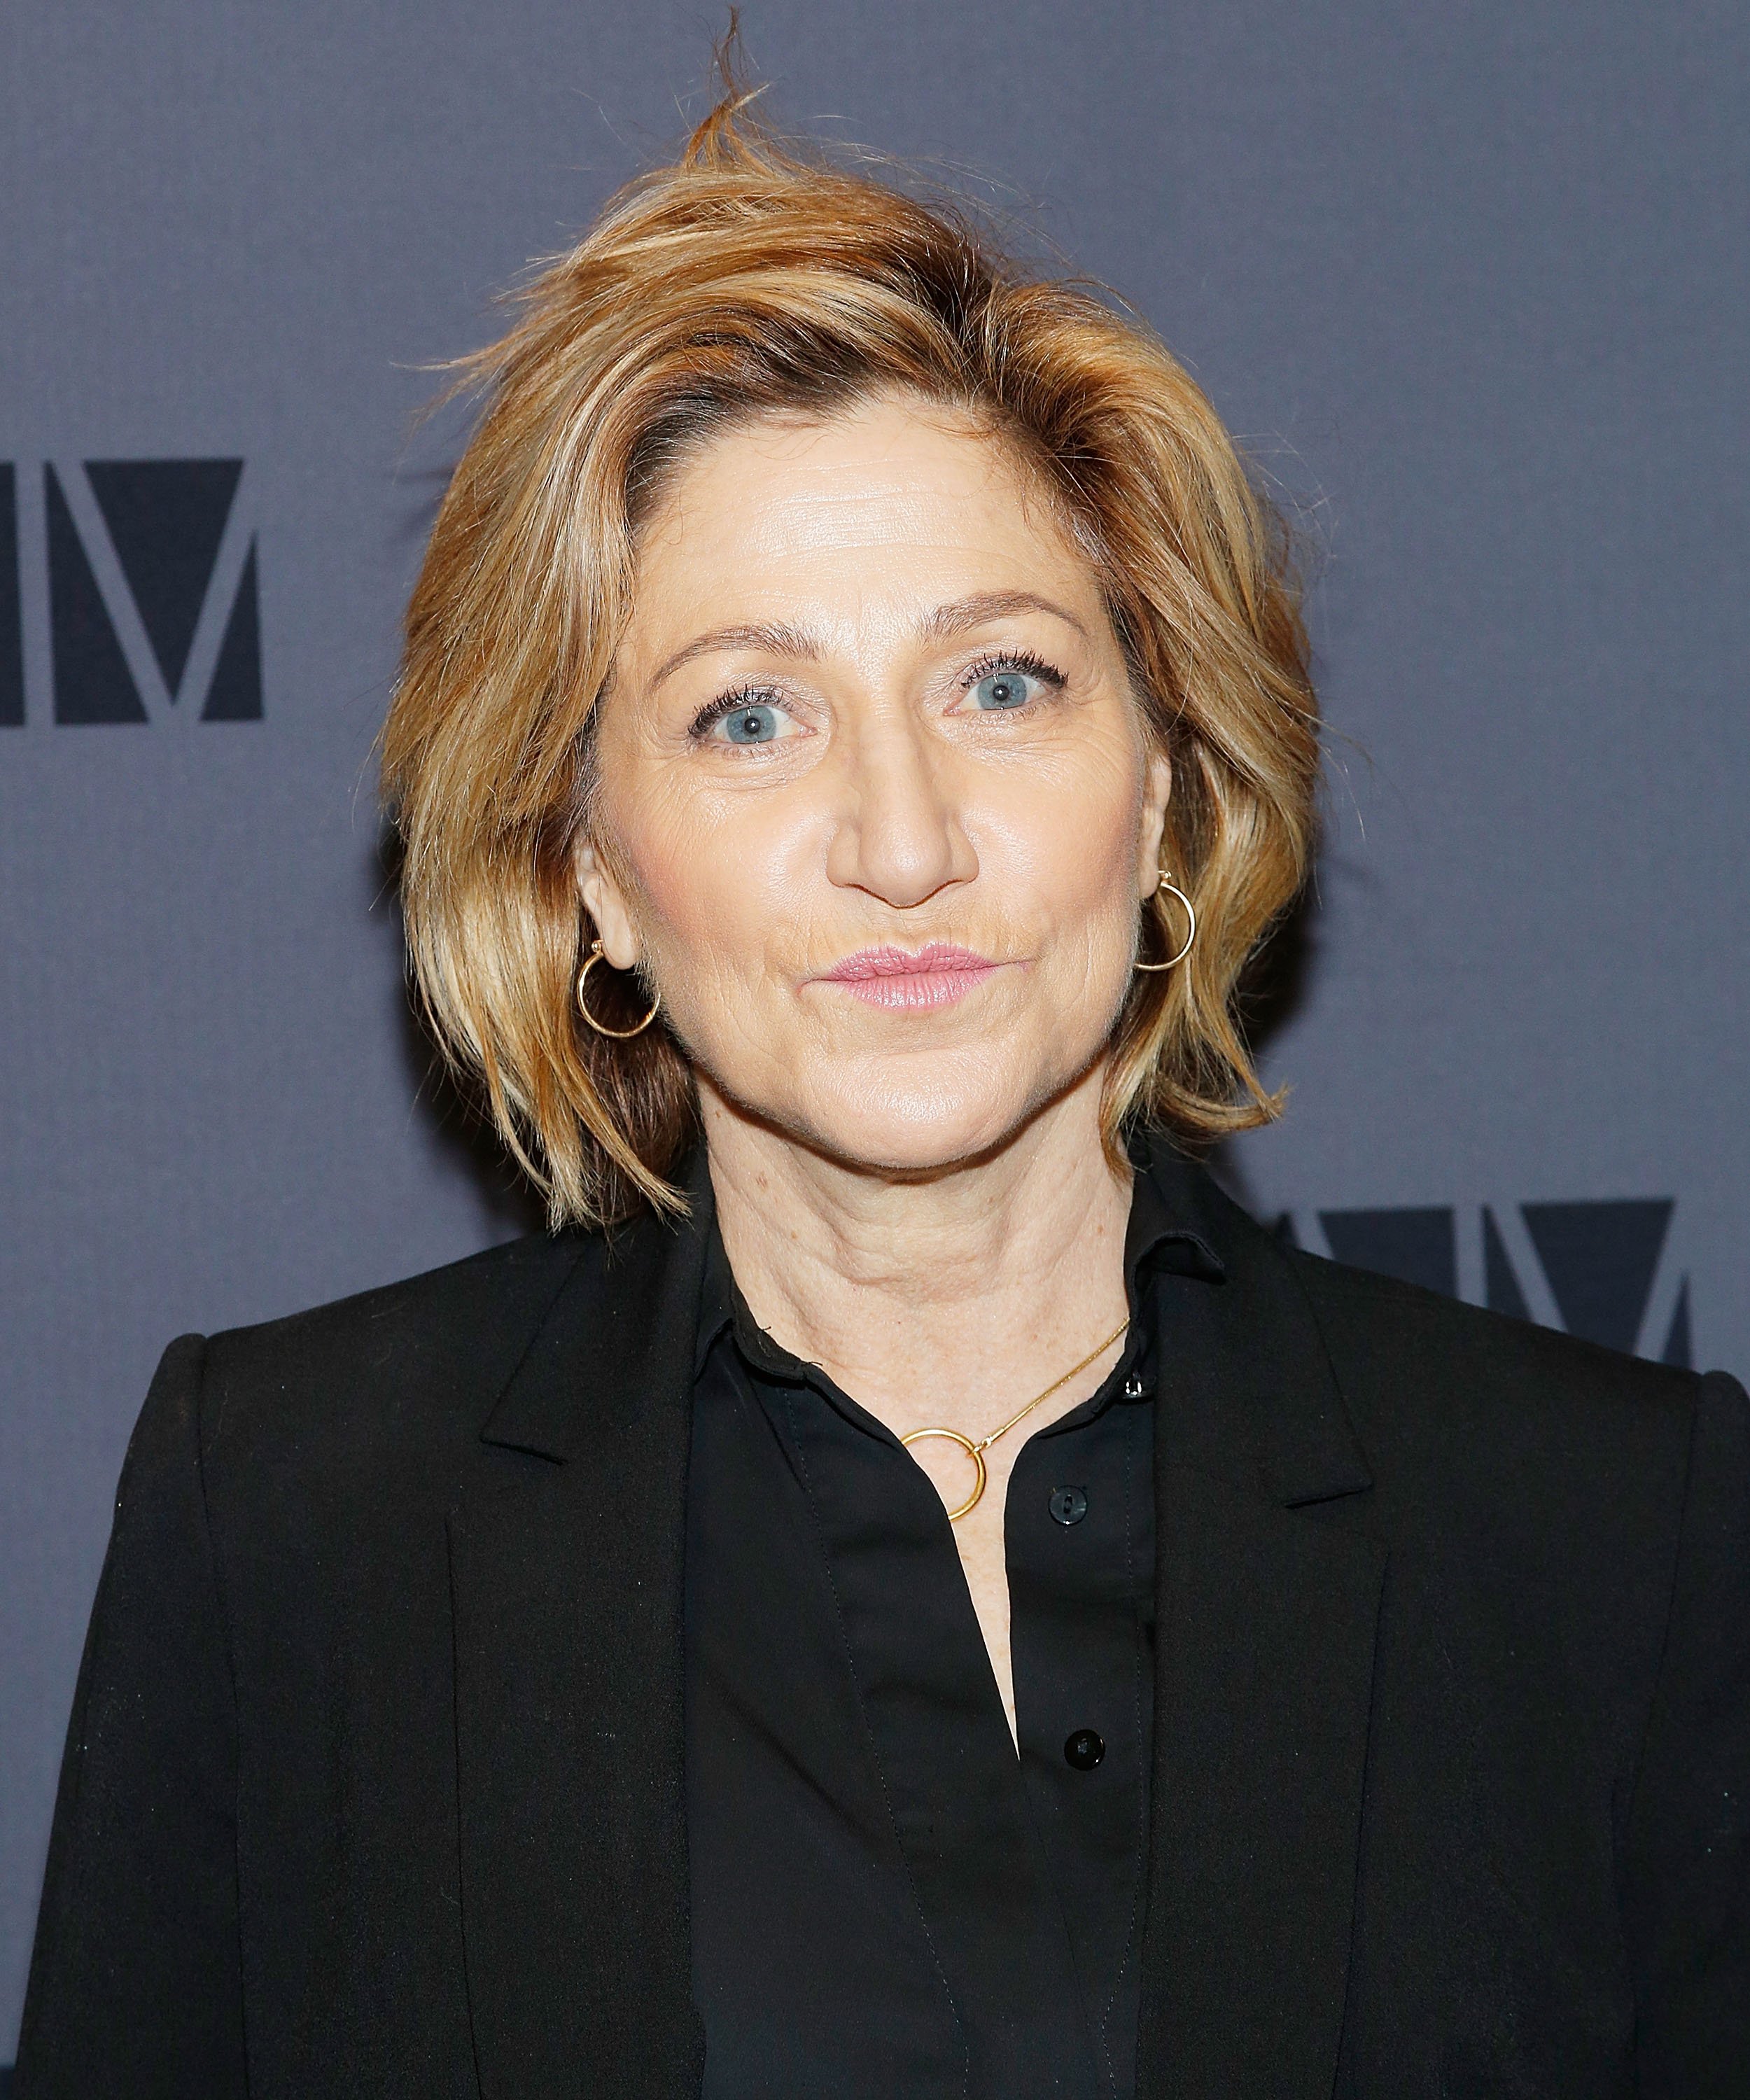 Edie Falco at the opening night party for "Medea" at the BAM Harvey Theater on January 30, 2020 | Photo: Getty Images